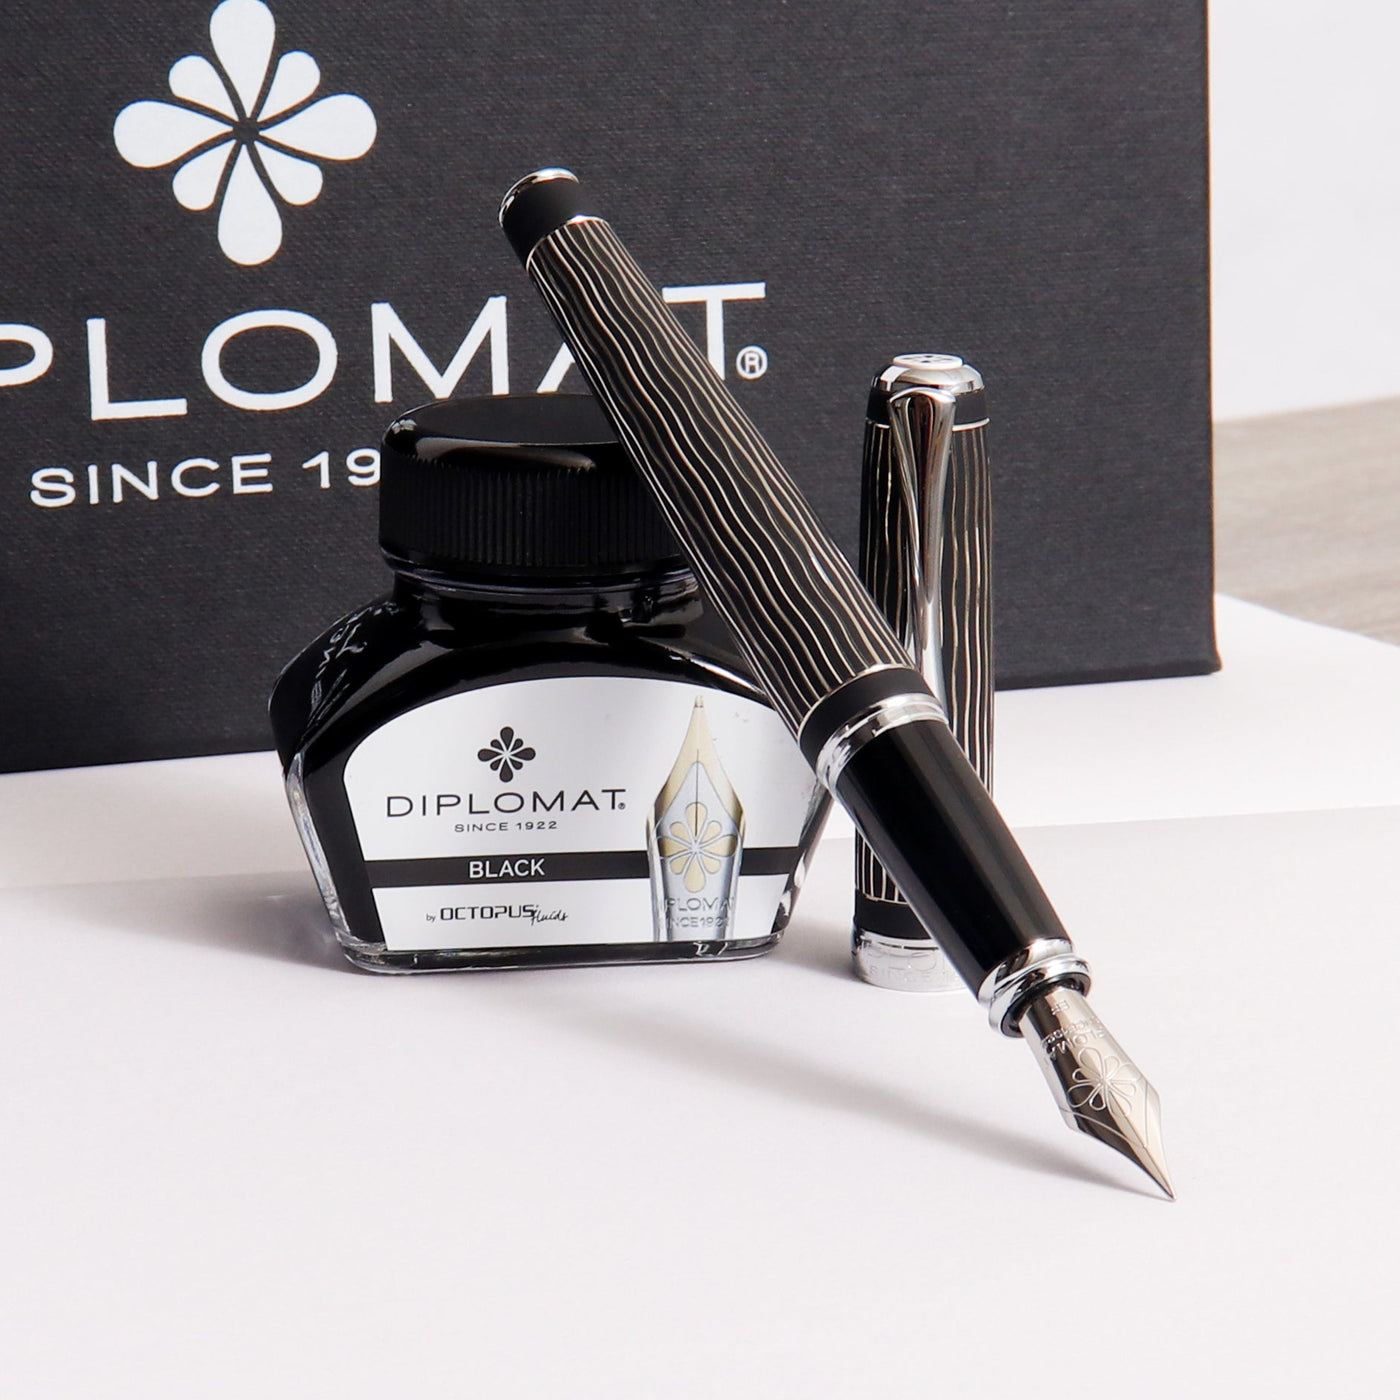 Diplomat-Excellence-A+Wave-Black-Fountain-Pen-Gift-Set-Anodized-Aluminum-Body